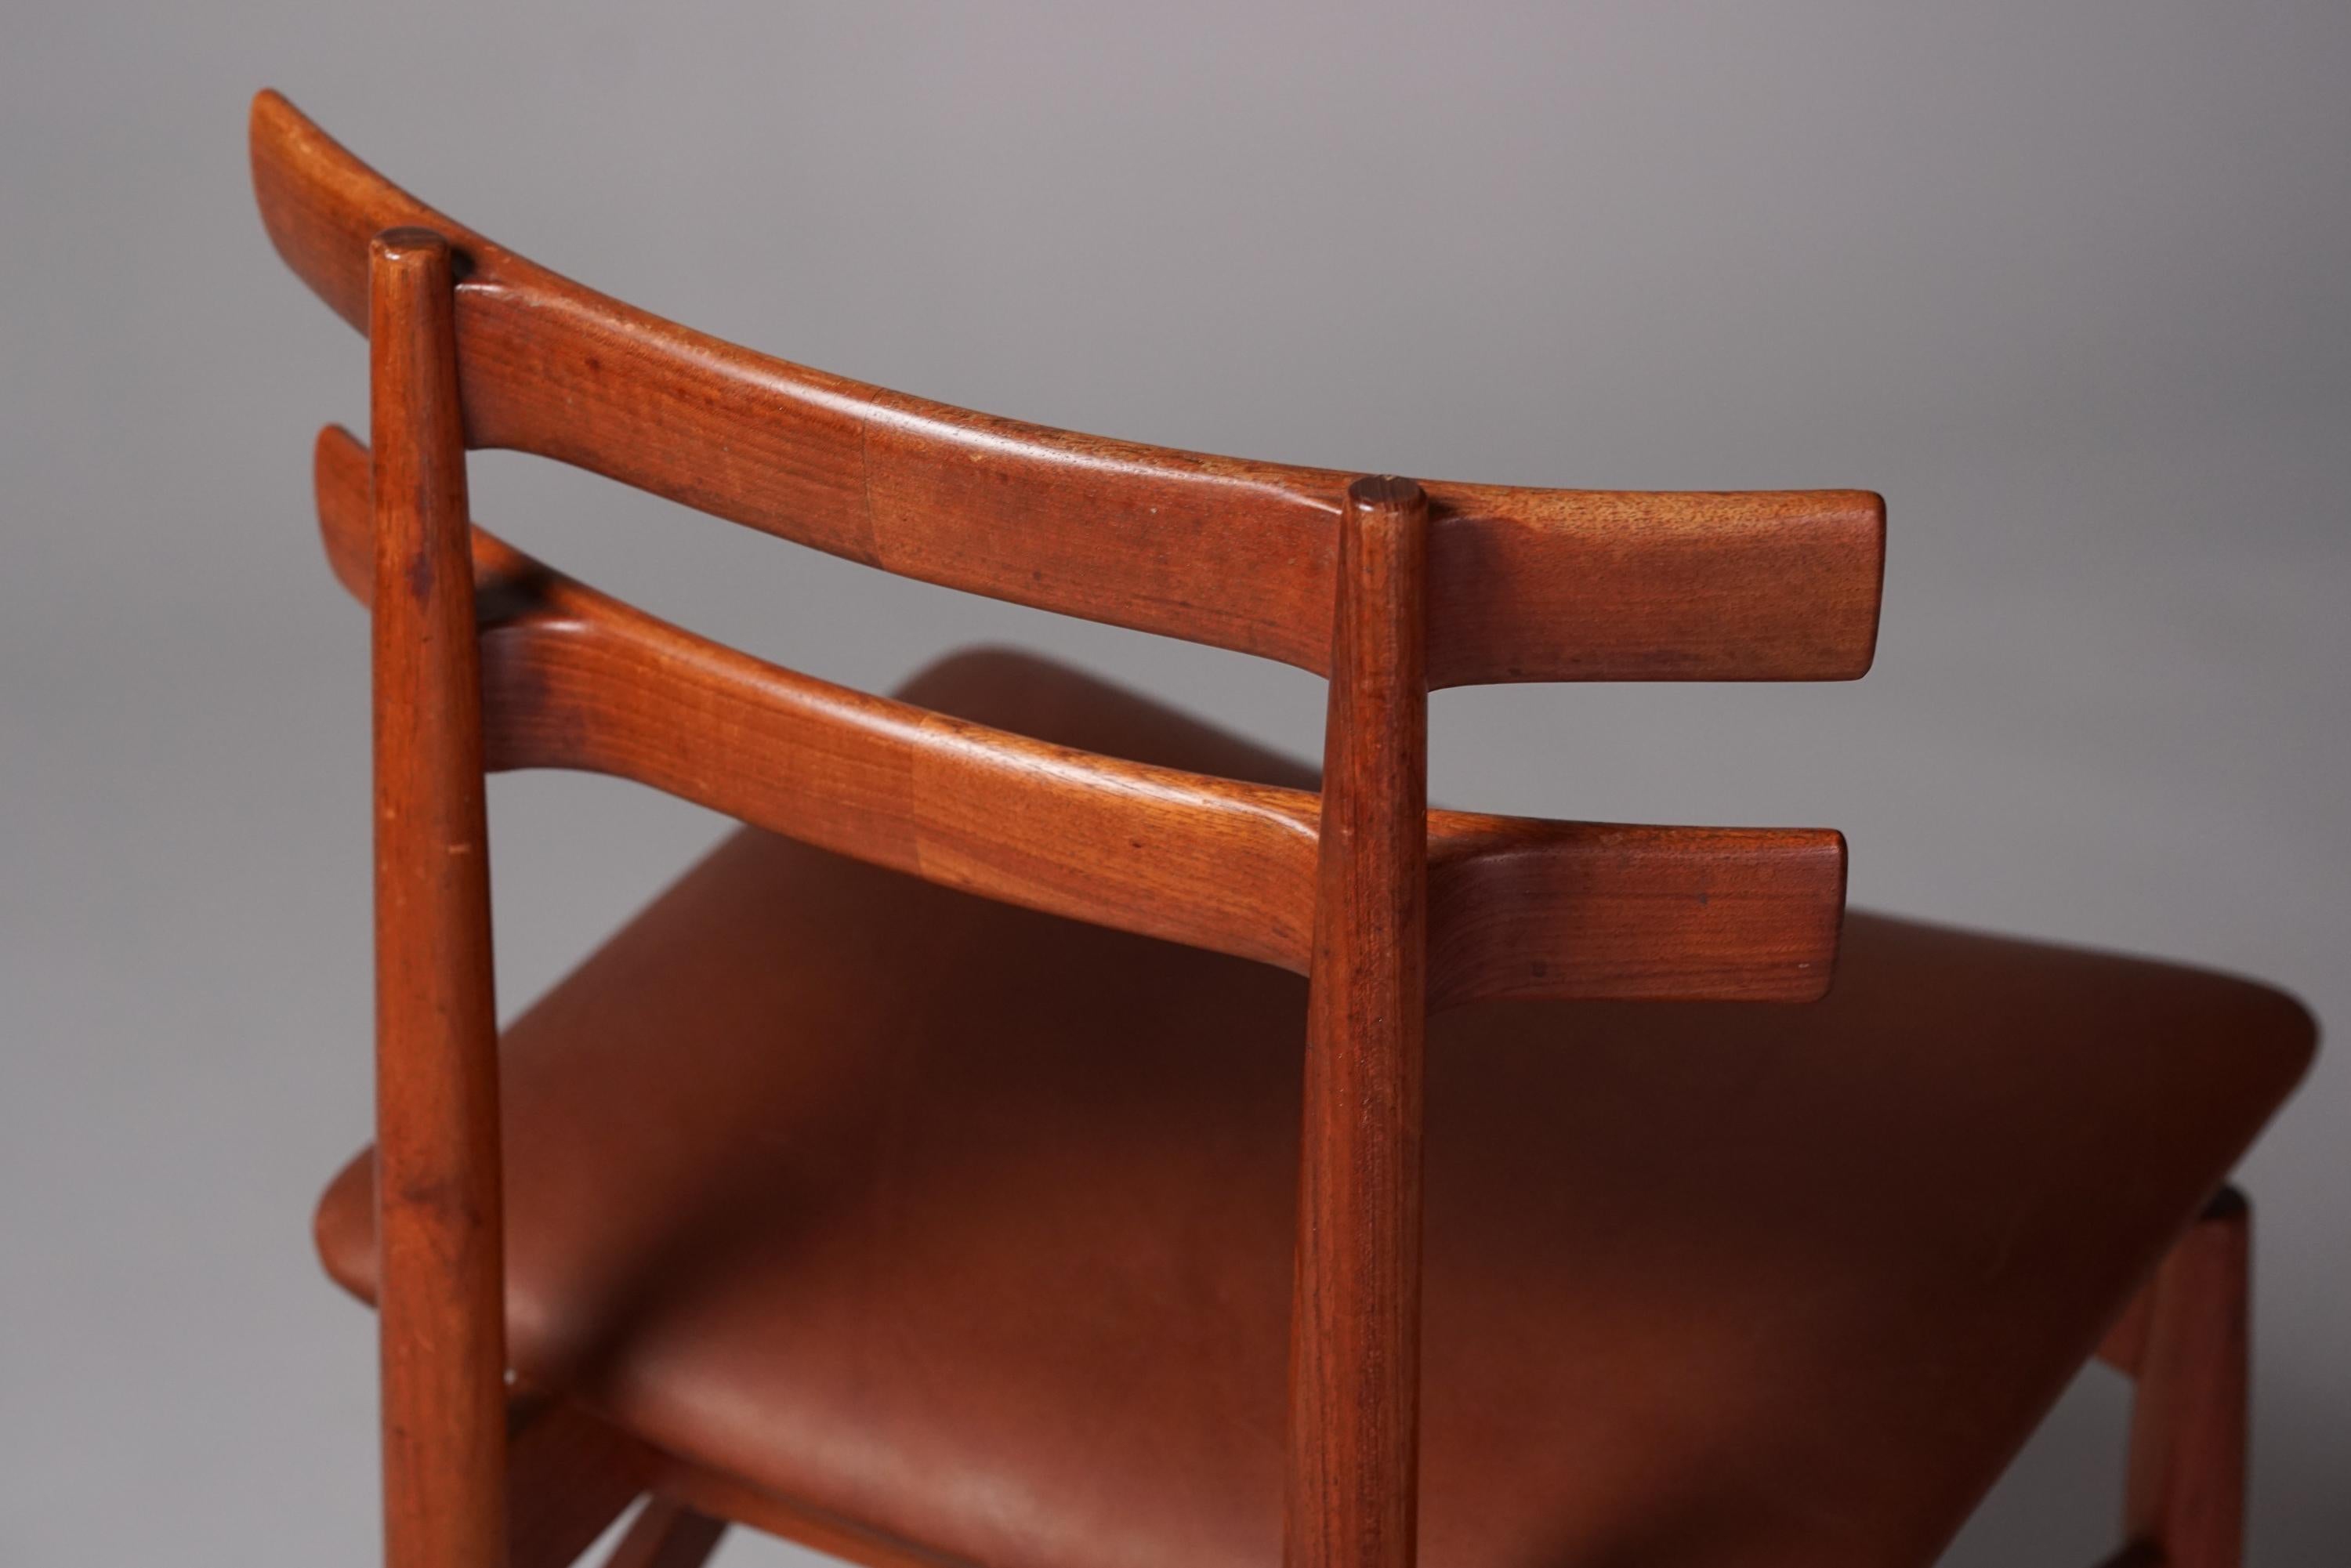 Set of Four Teak Chairs, Poul Hundevad, 1960s For Sale 4